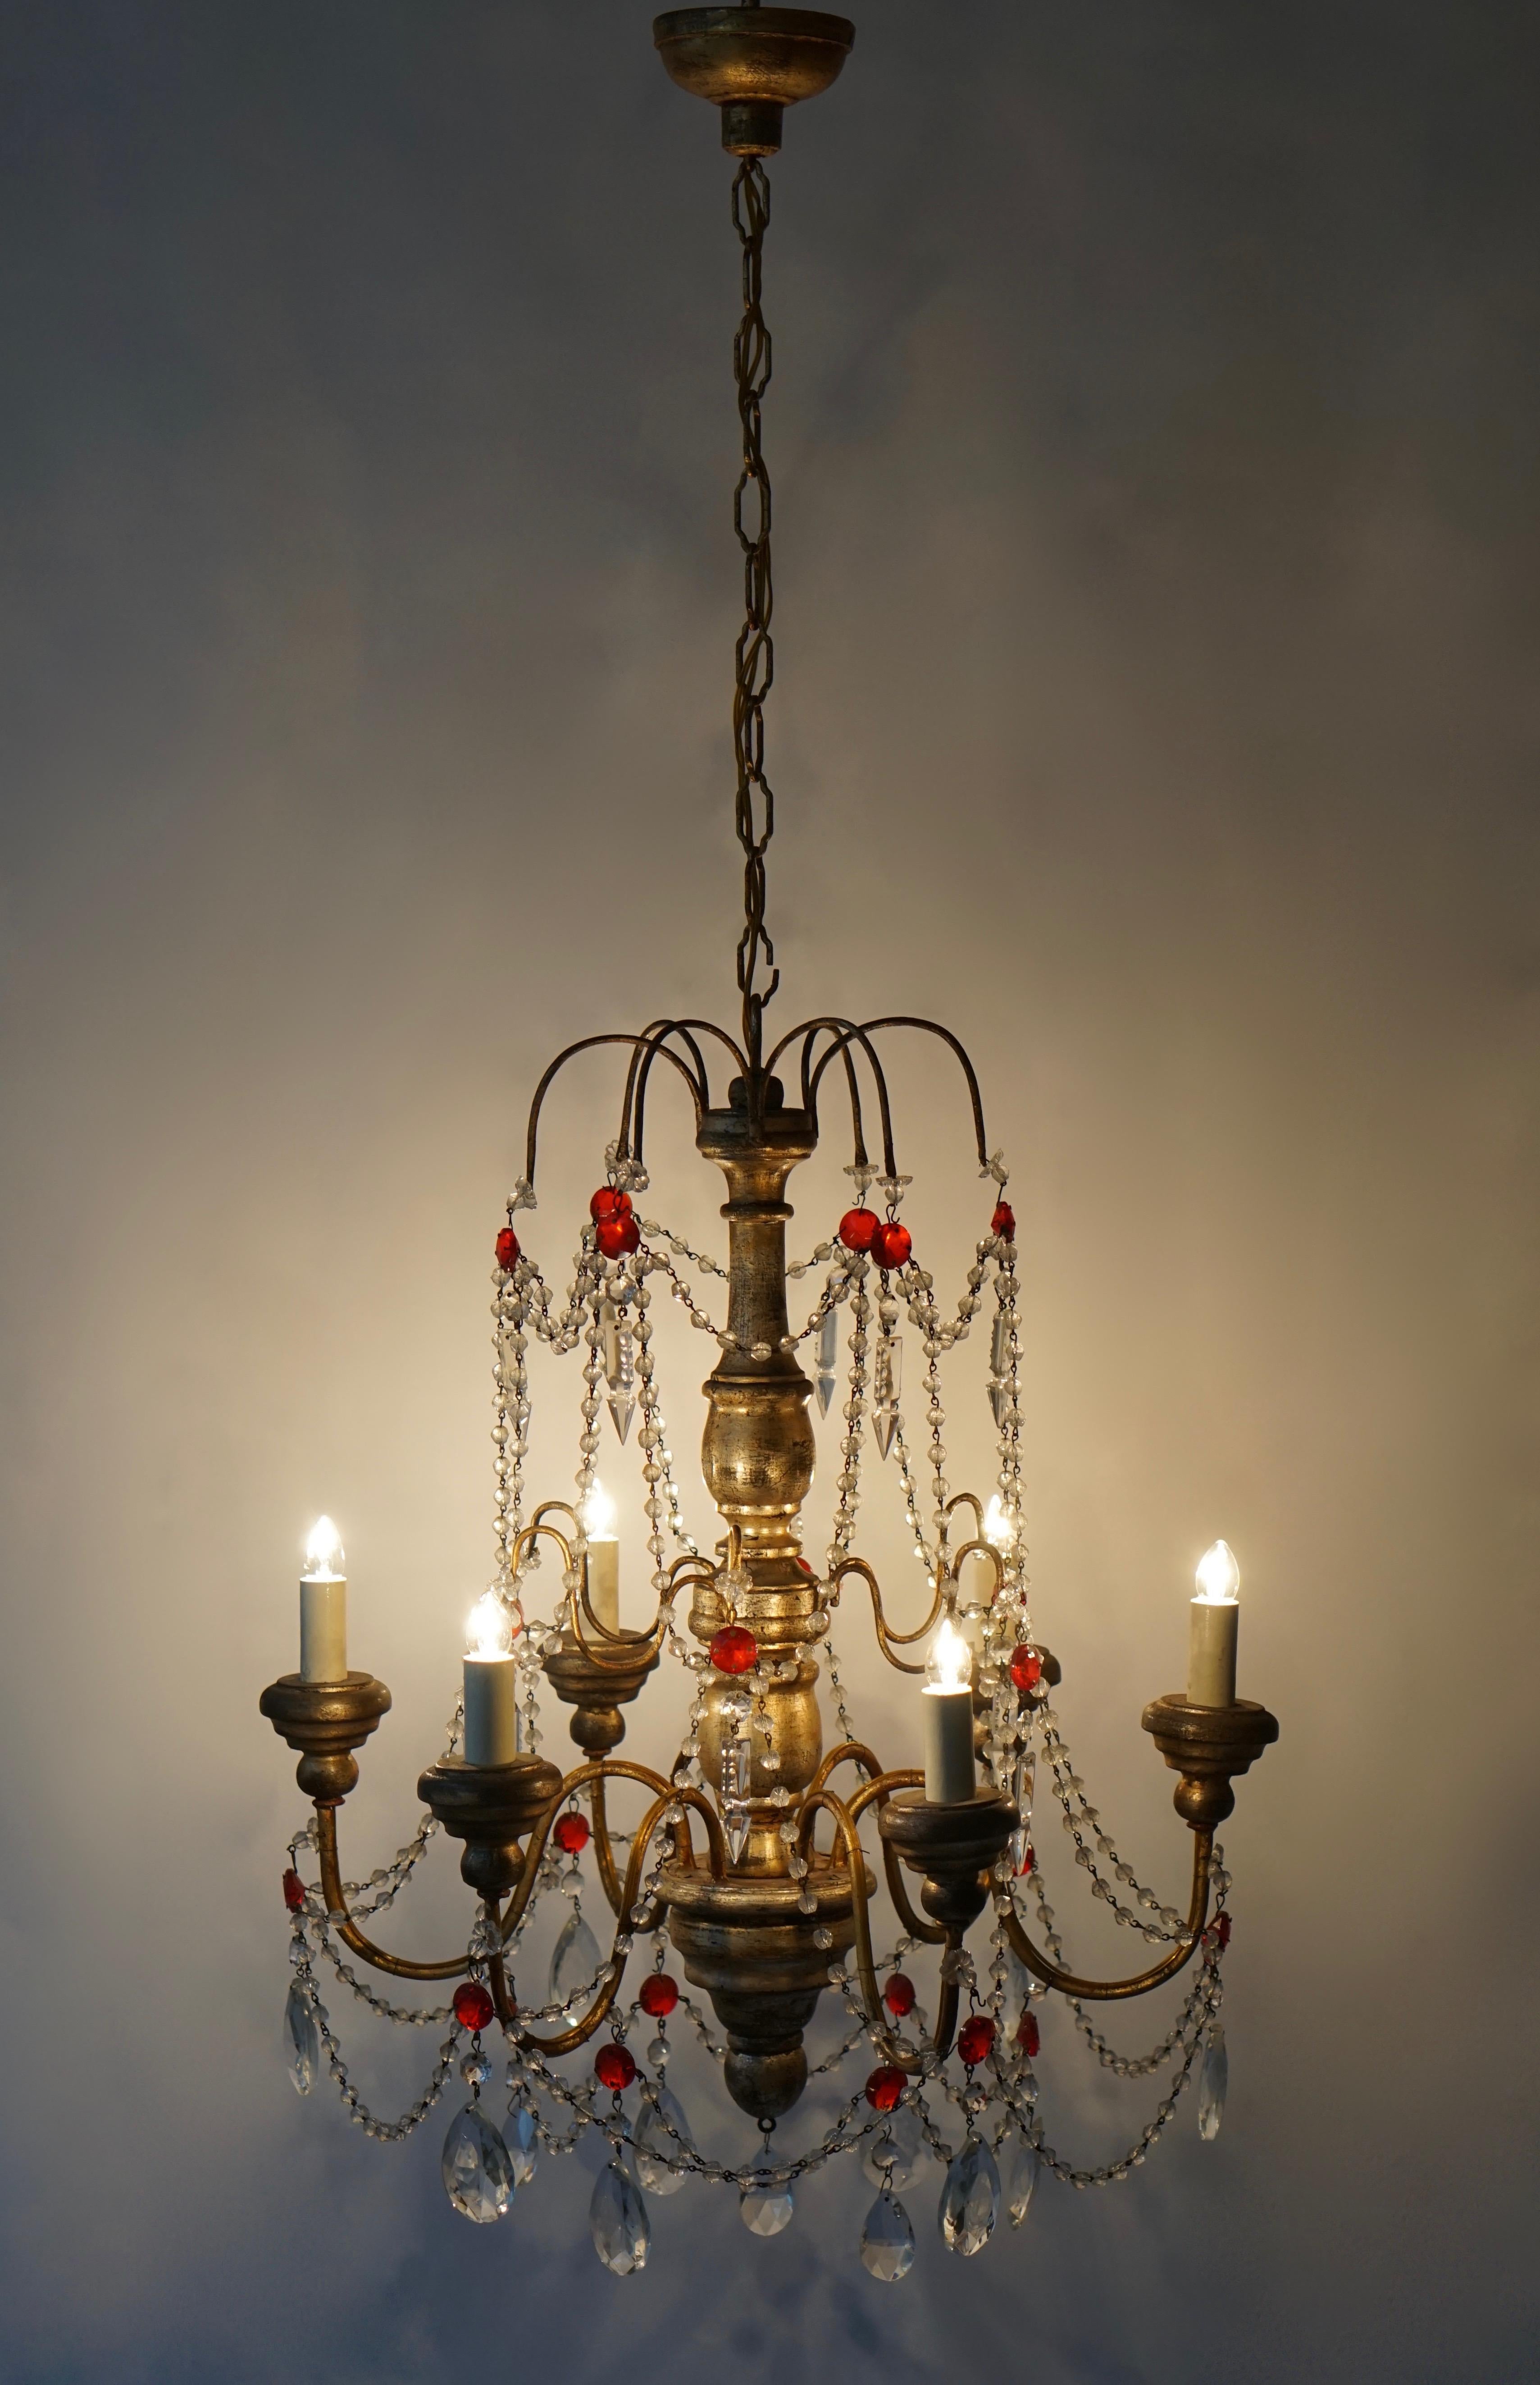 Italian chandelier in painted metal, wood and crystal.
Diameter 55 cm.
Height fixture 70 cm.
Total height 125 cm.
Six E14 bulbs.